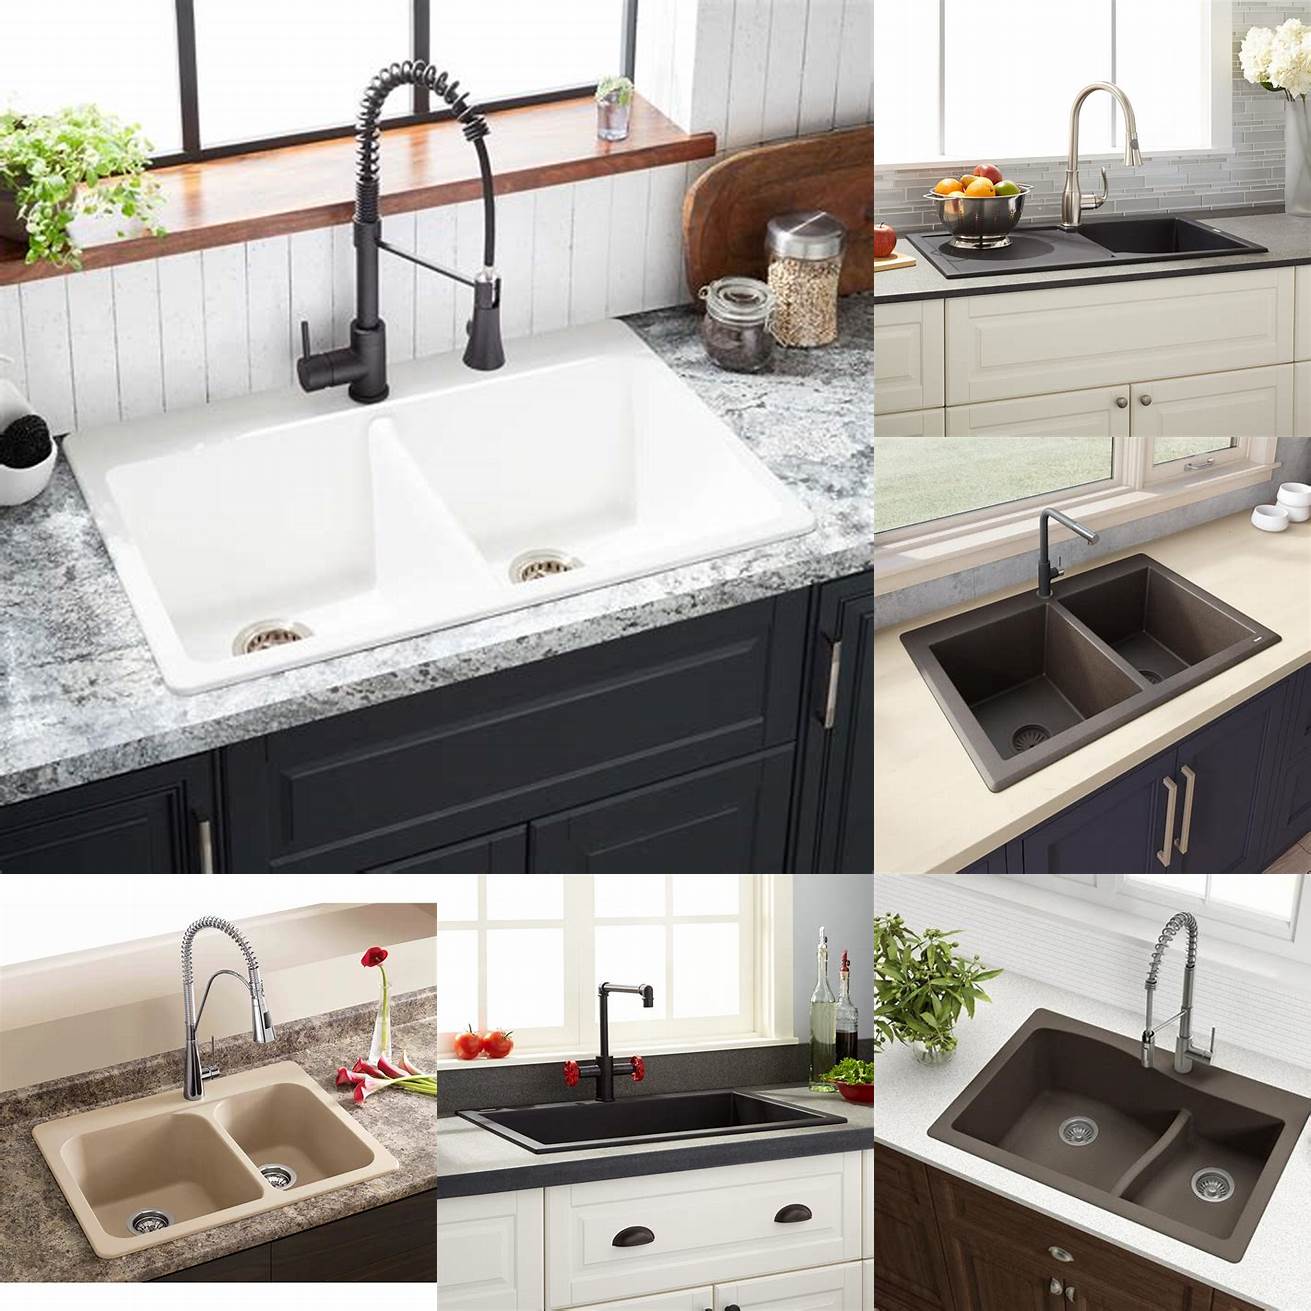 Image of a composite kitchen sink in a neutral color